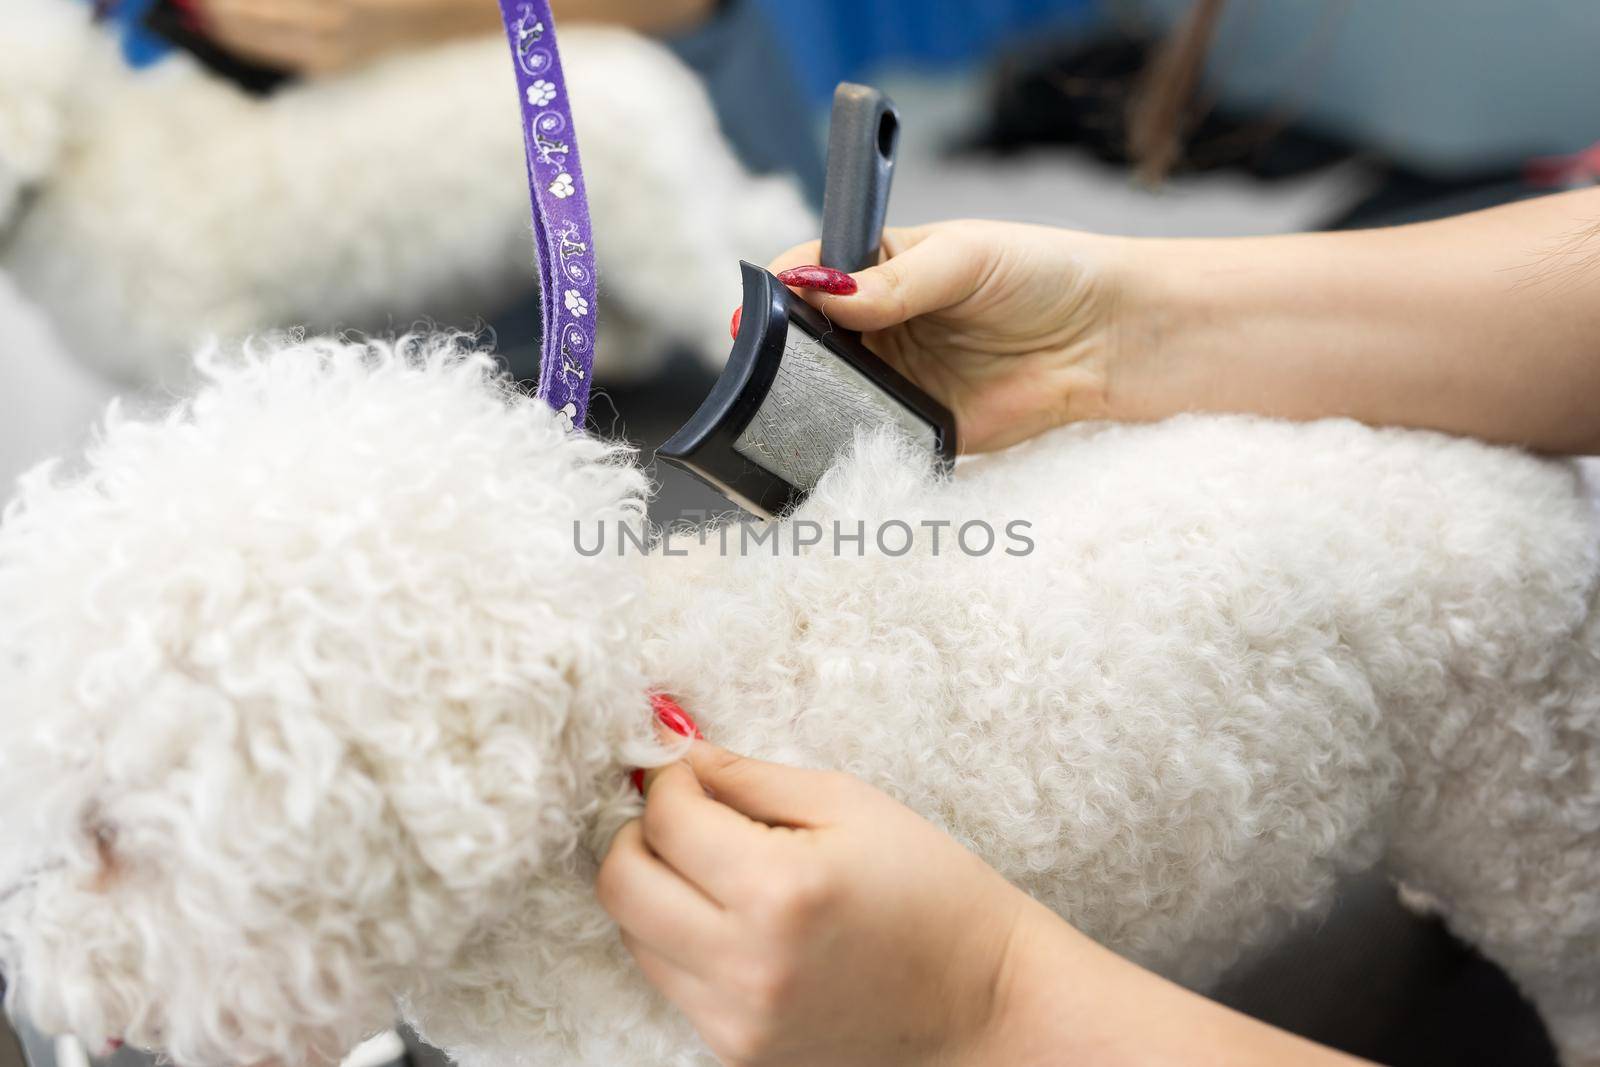 Grooming animals, grooming, drying and styling dogs, combing wool. Grooming master cuts and shaves, cares for a dog Bichon Frise